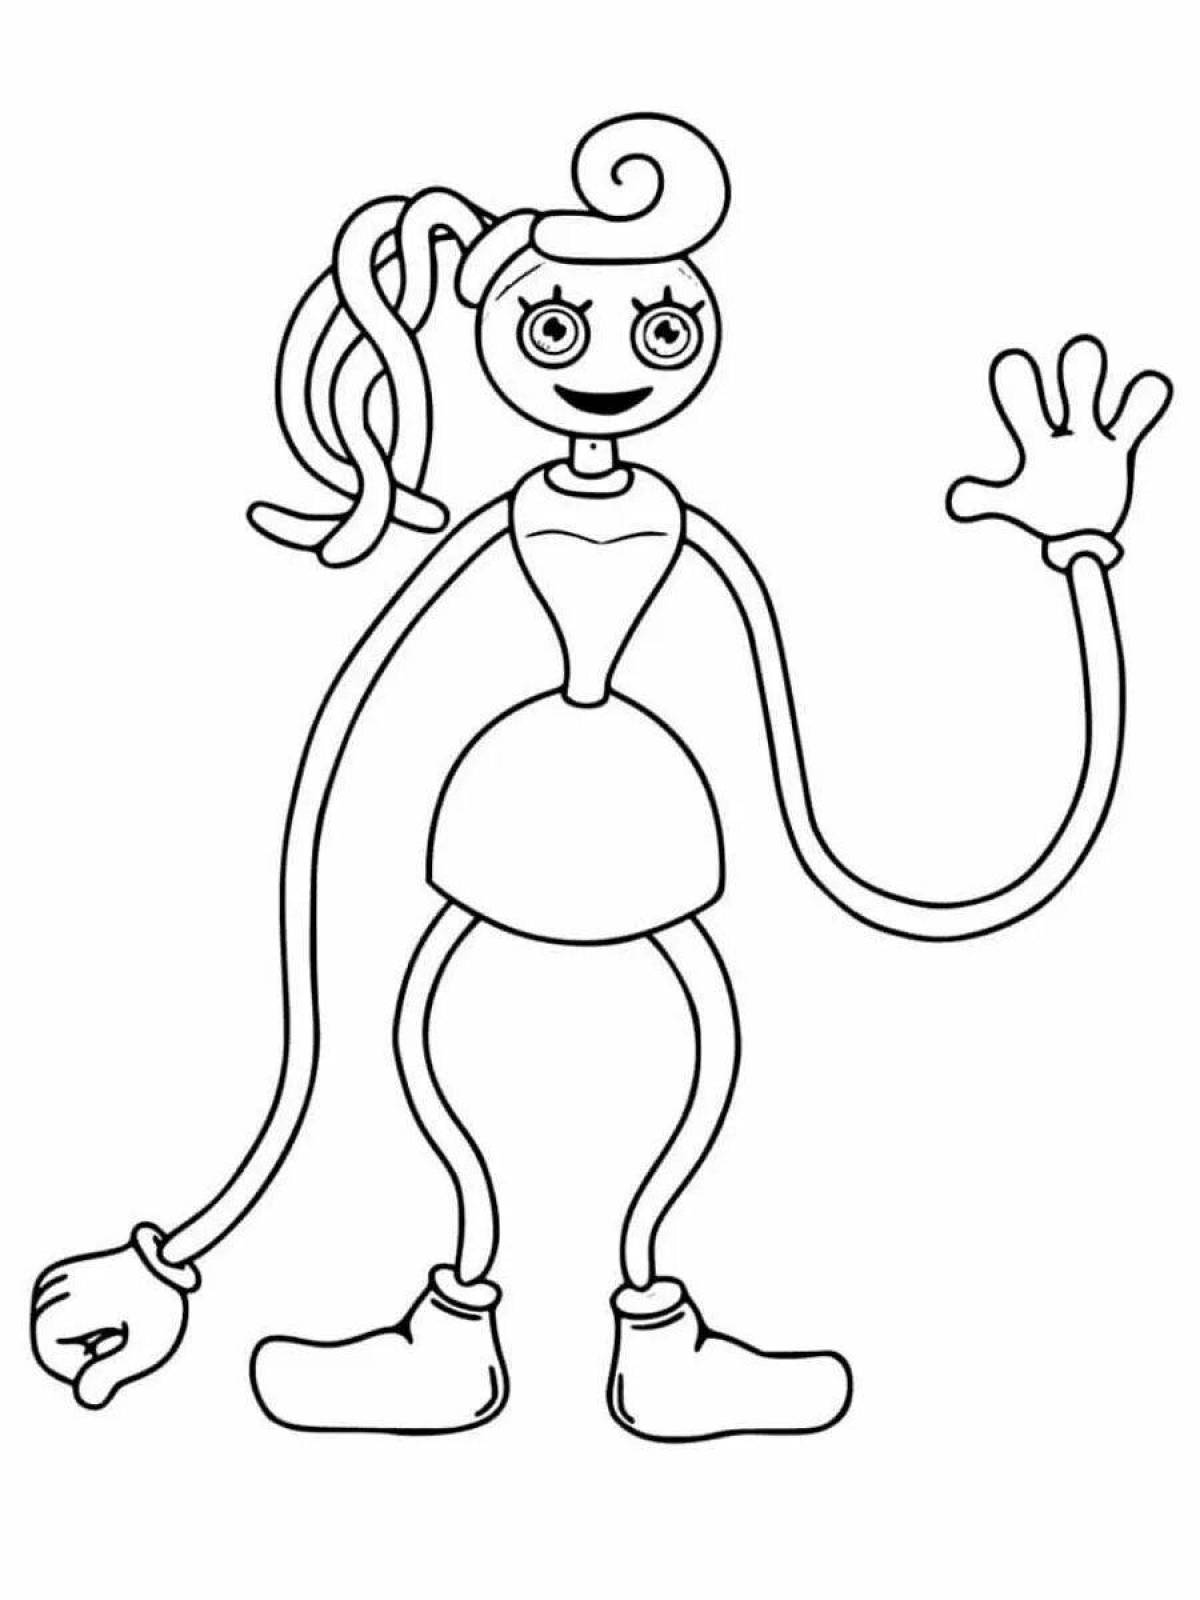 Glowing Dad Long Legs coloring page